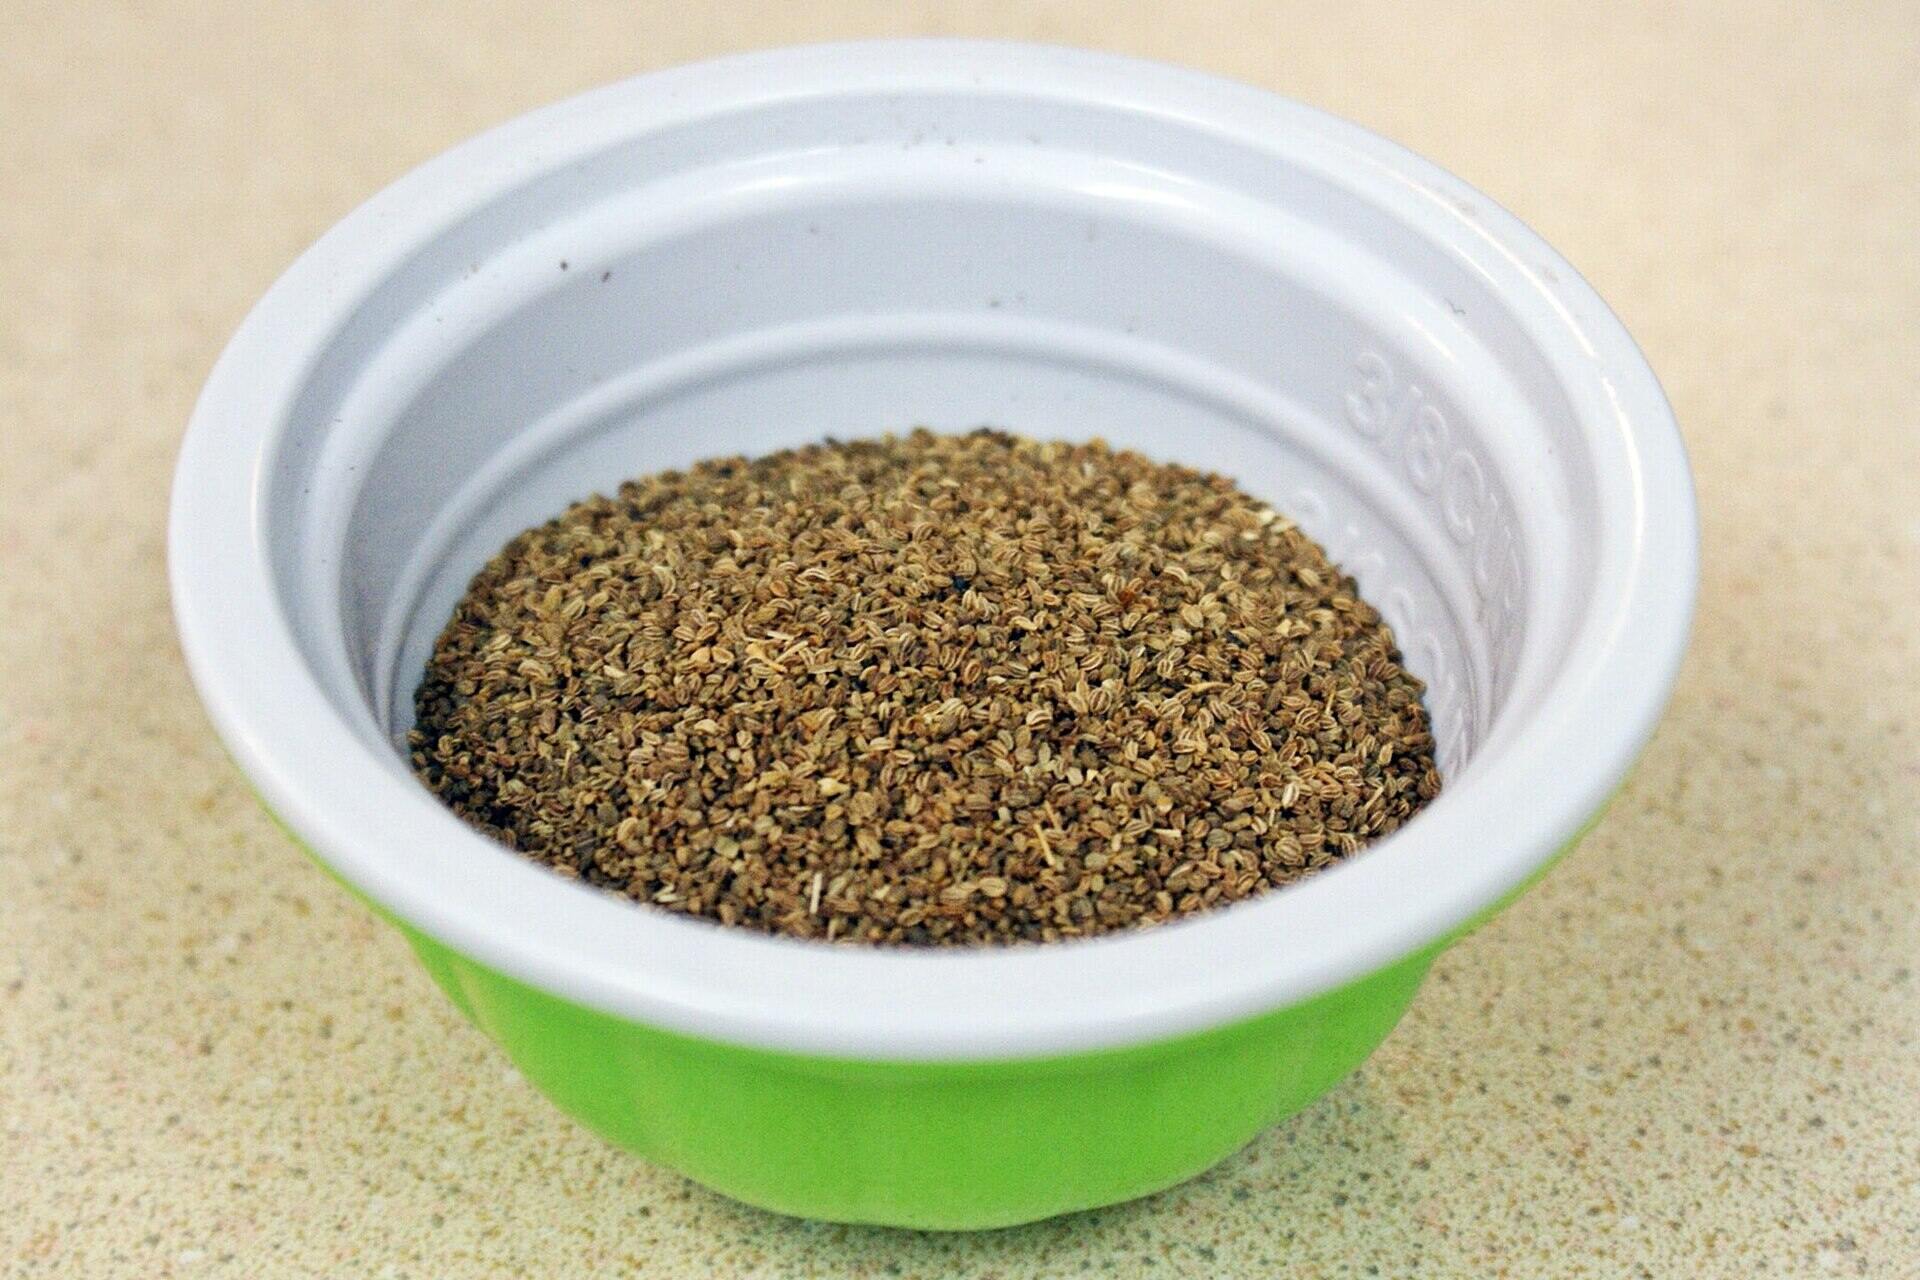 What Can I Use Instead Of Celery Seed